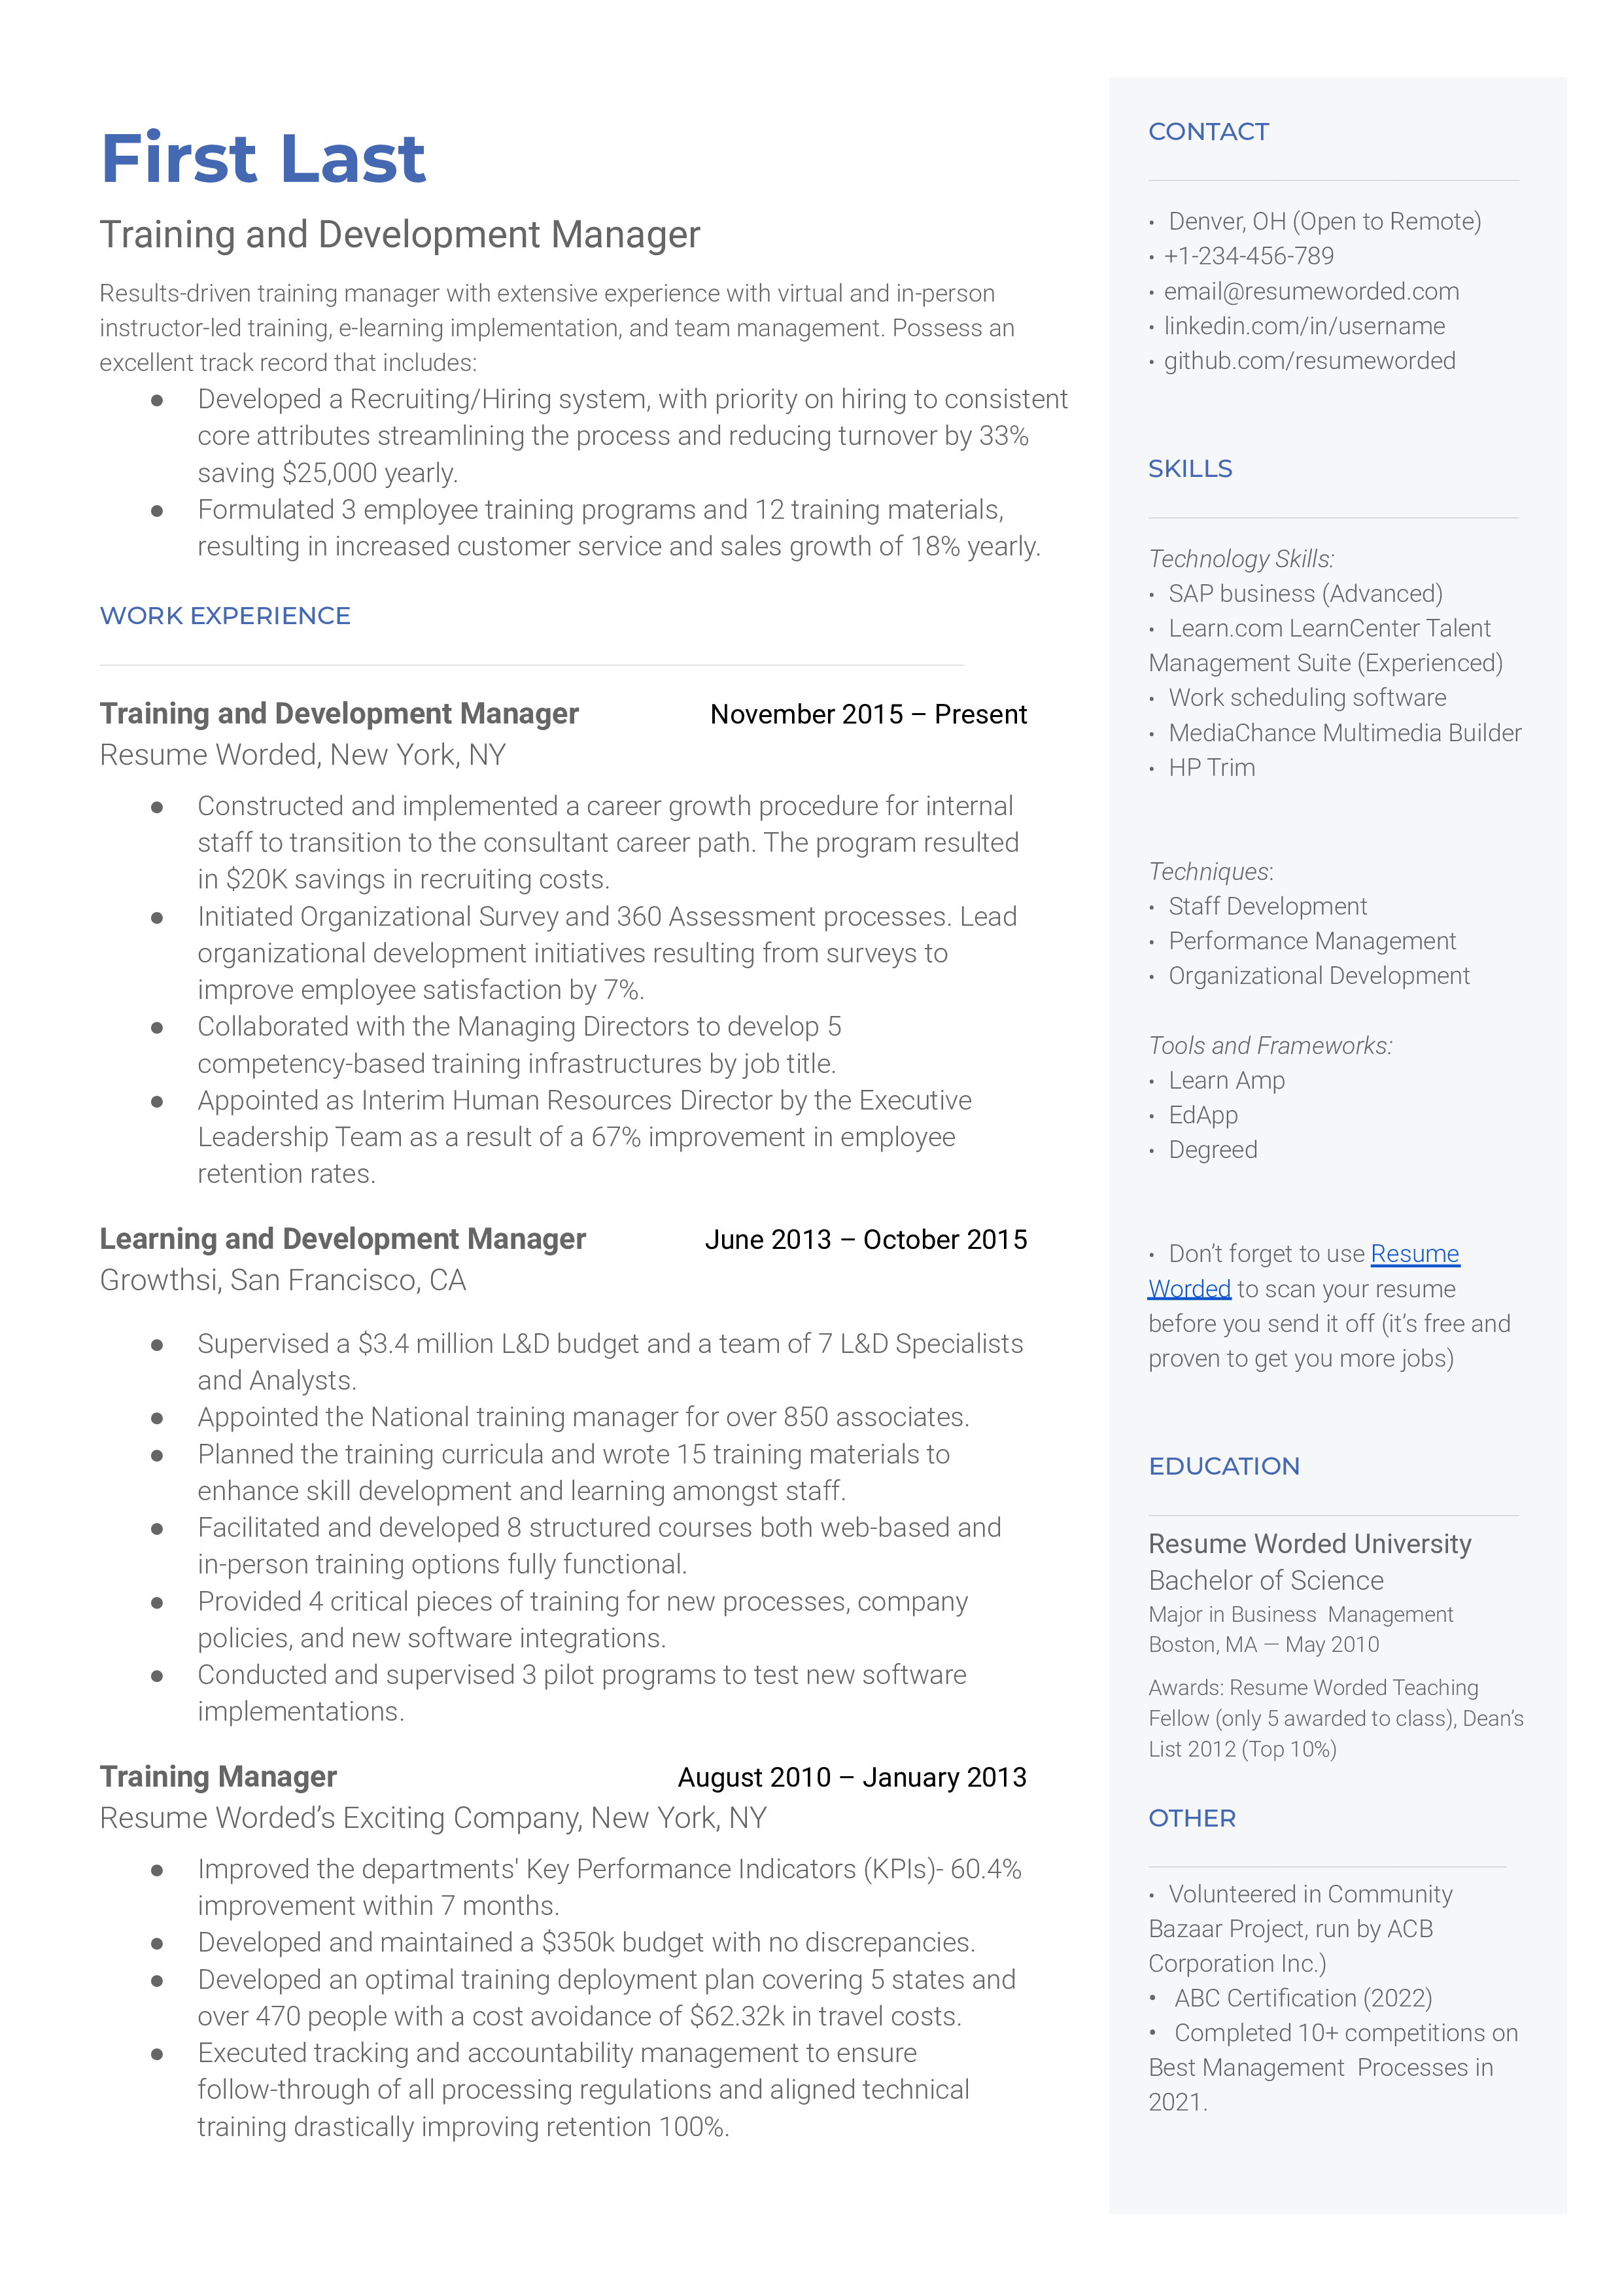 Training and Development Manager Resume Sample